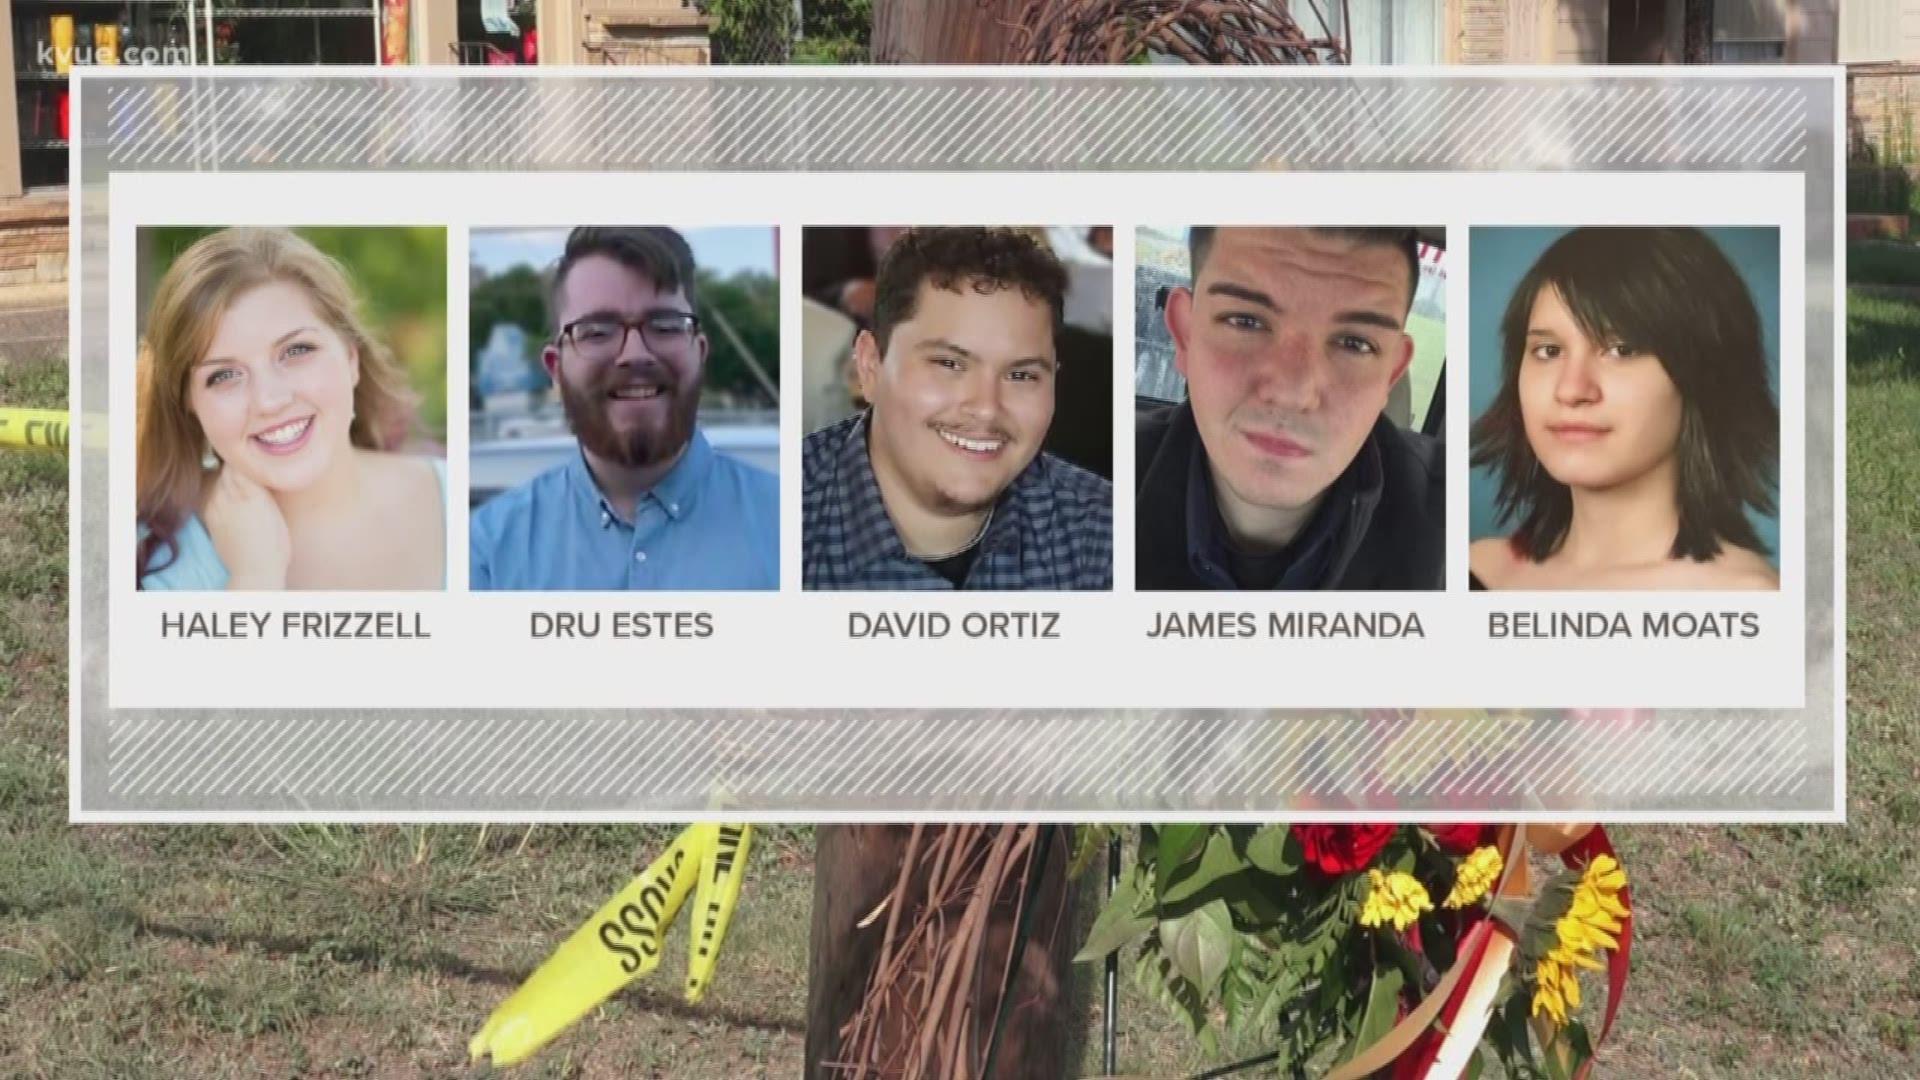 It's been almost 1 year since an apartment fire killed five students in San Marcos, and investigators are still looking for the person responsible.